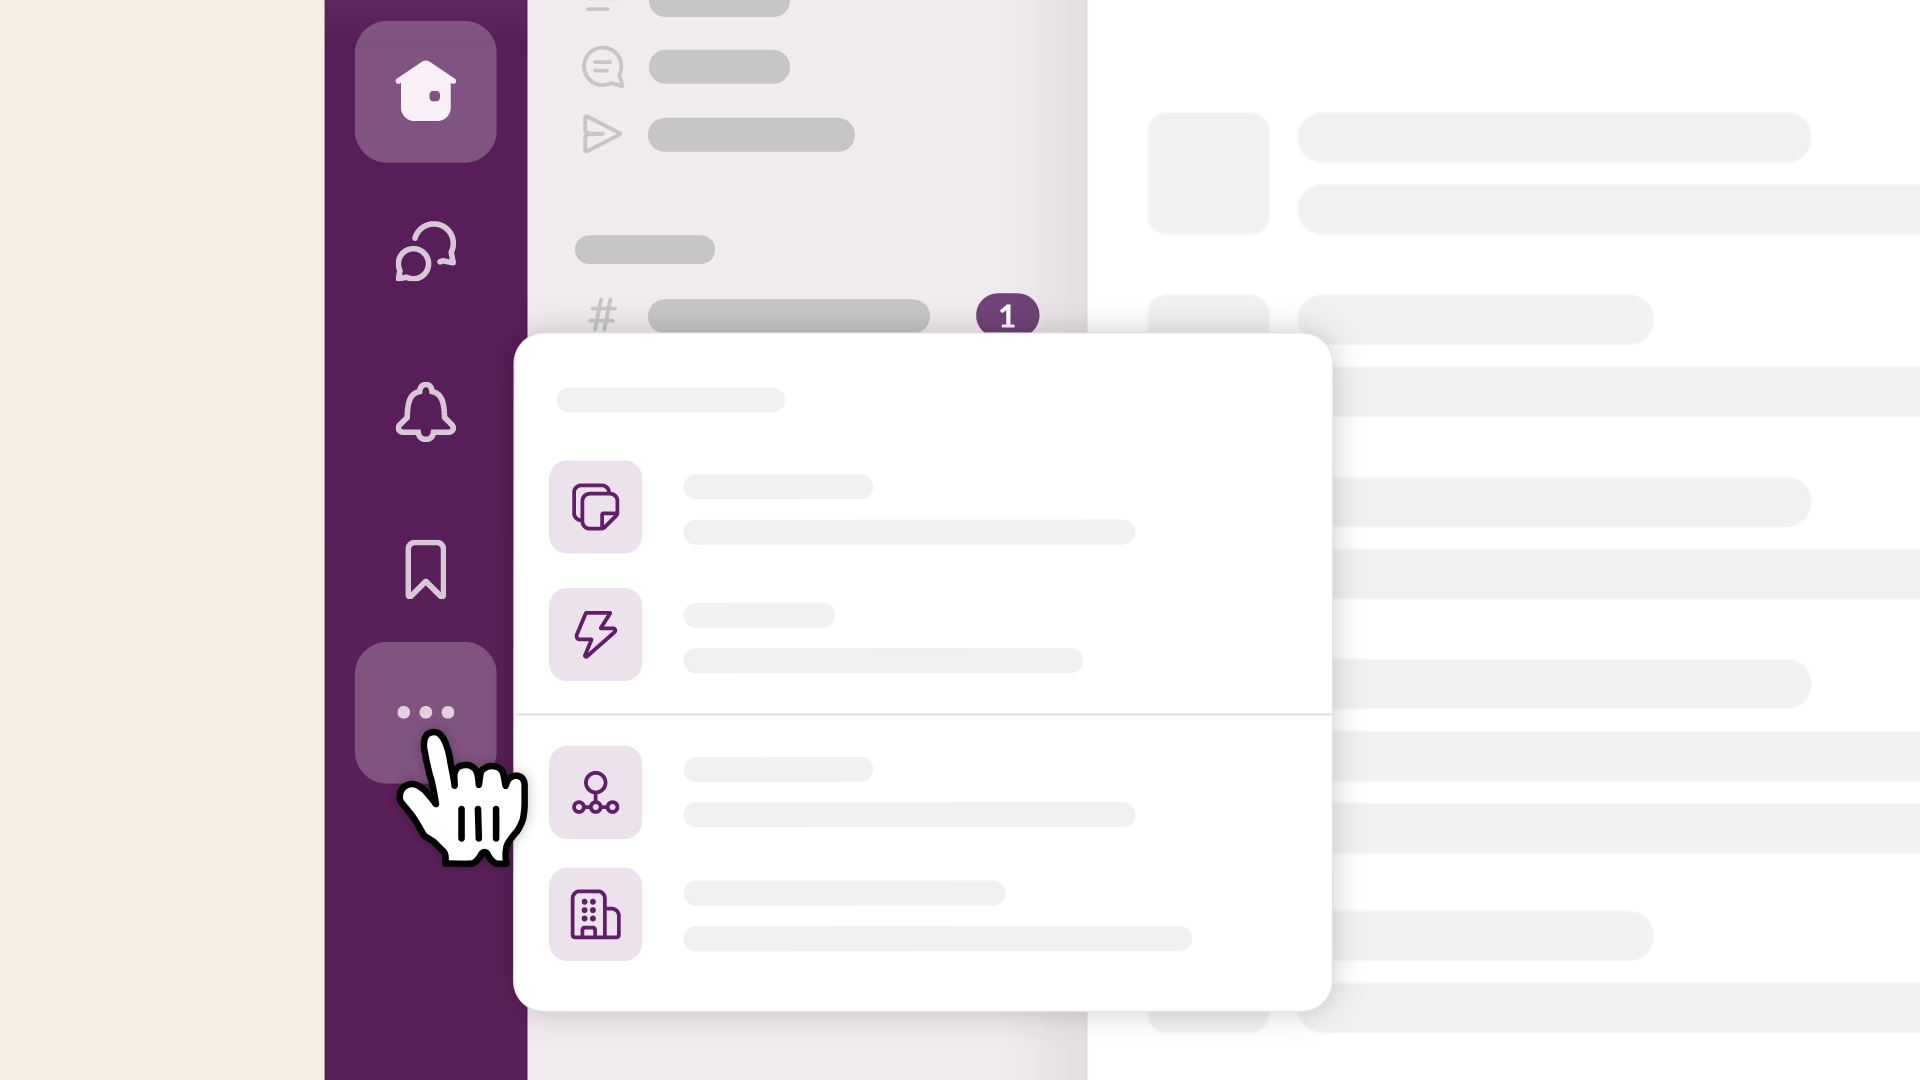 An image of a cursor over the More icon in the Slack desktop app.